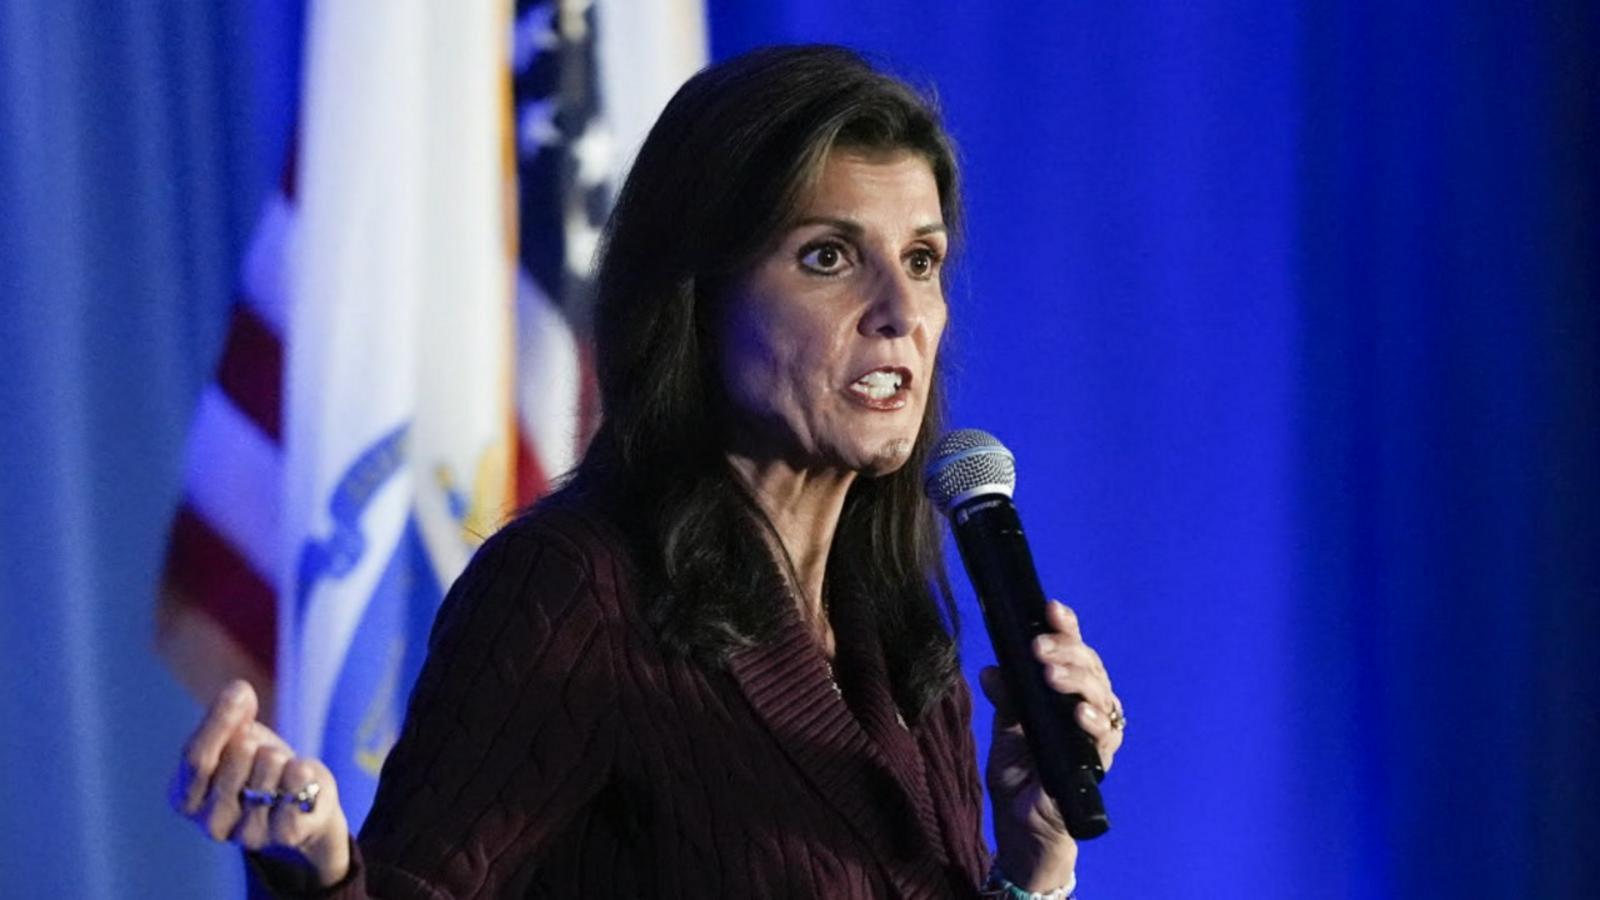 VIDEO: Nikki Haley to end presidential campaign: Sources